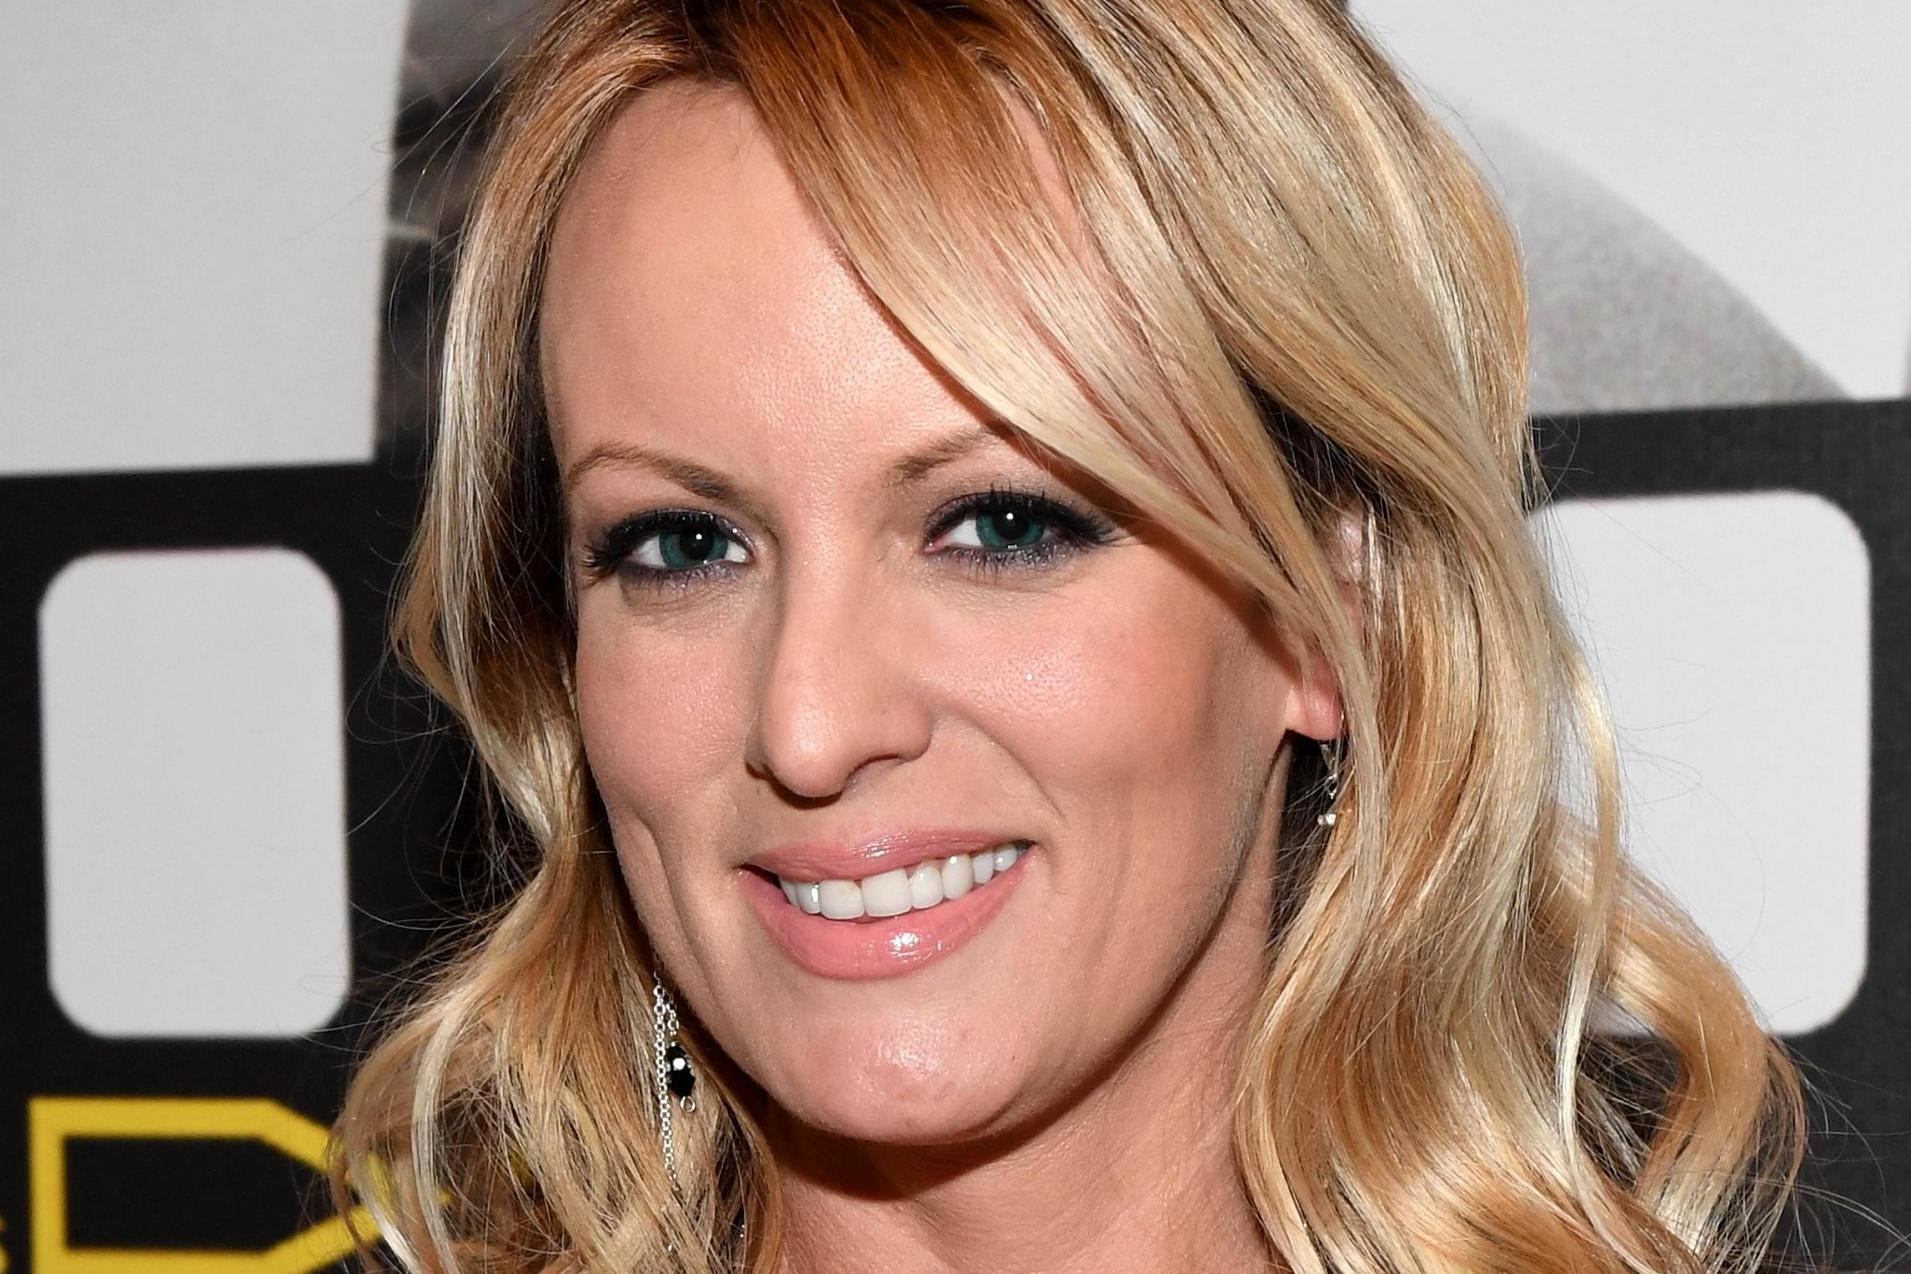 Space nuts stormy daniels